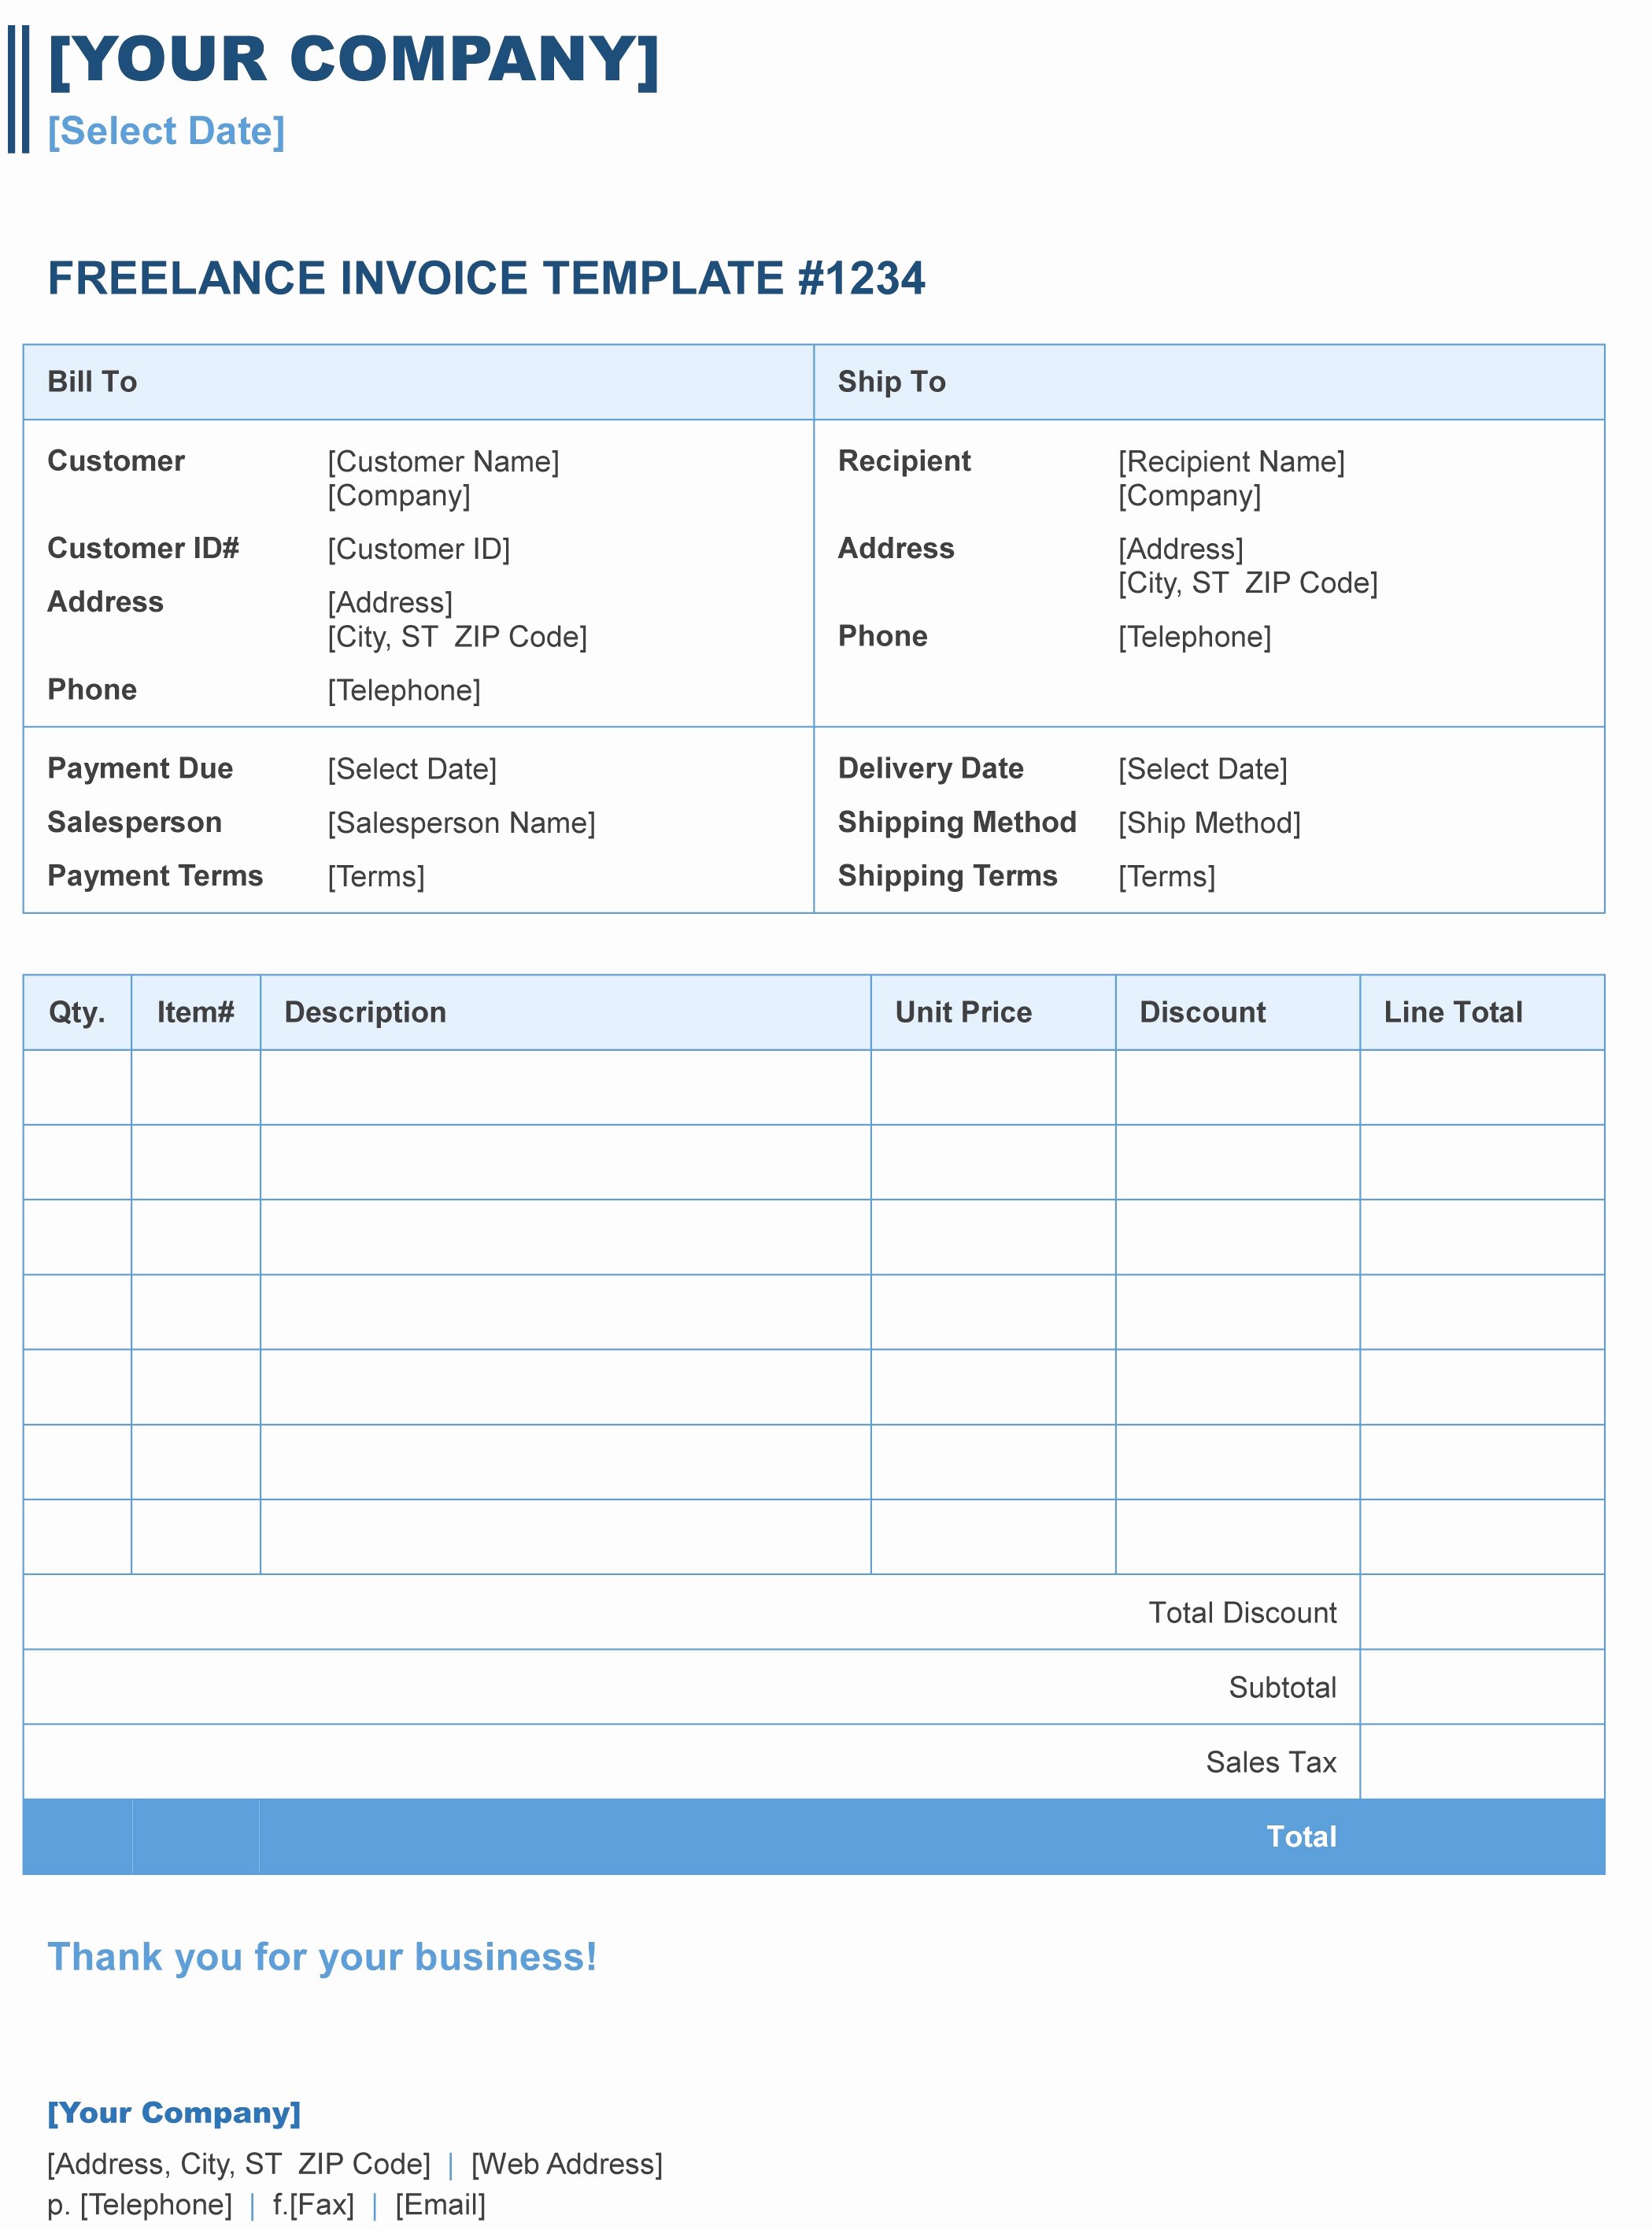 Sample Invoice Template Excel New Freelance Invoice Template Excel